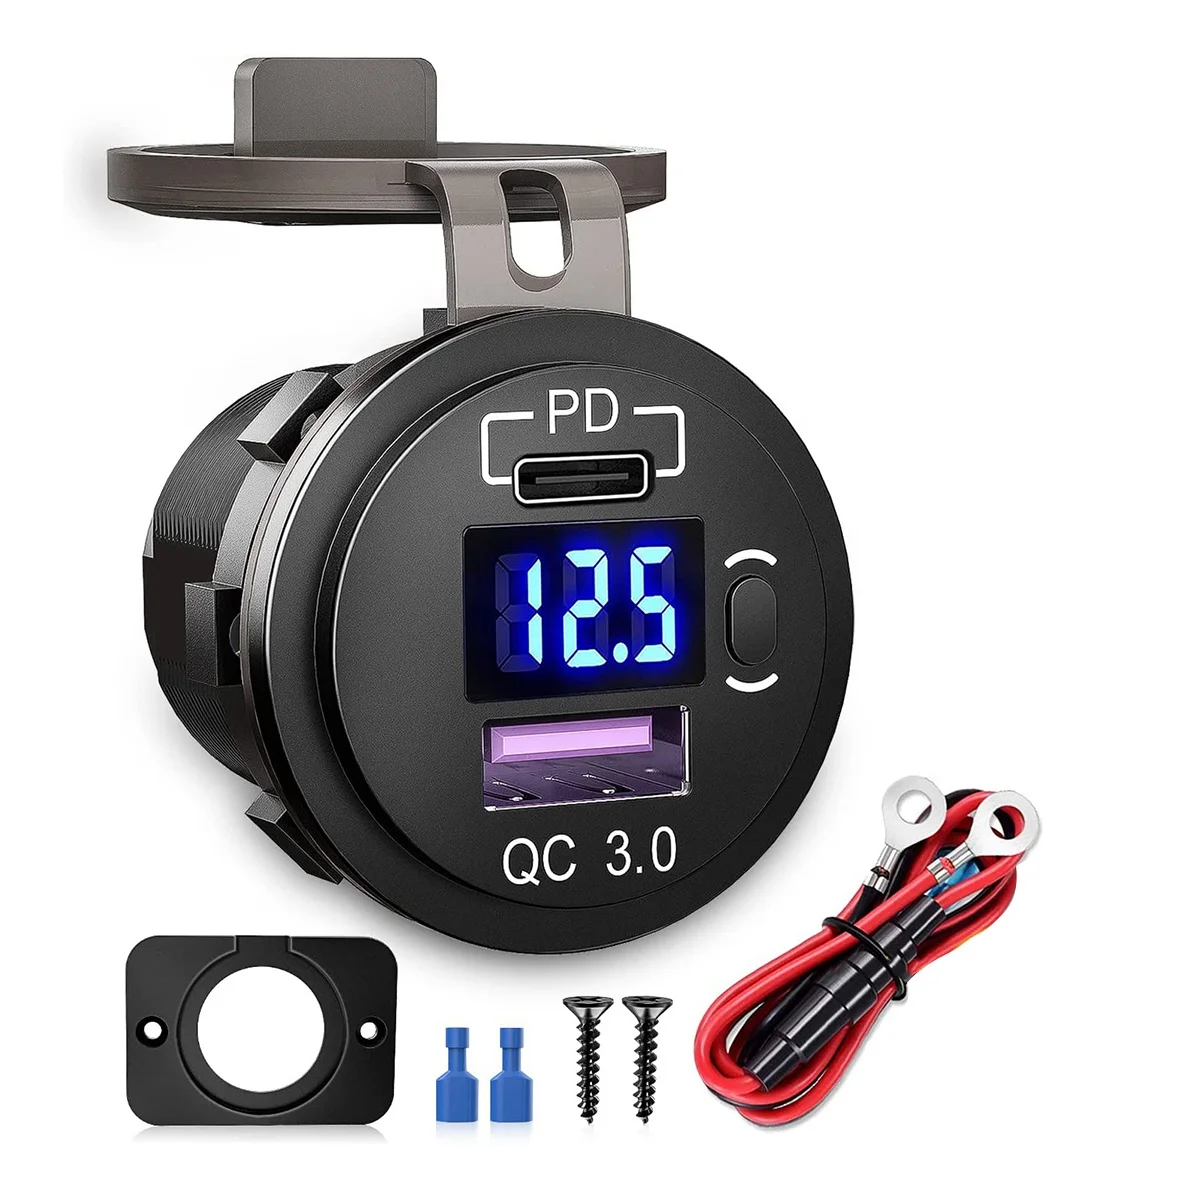 

Car Dual USB Charger Quick Charge QC 3.0 & PD USB Charger Socket Adapter with Switch Voltmeter for Trucks RV Motorcycle